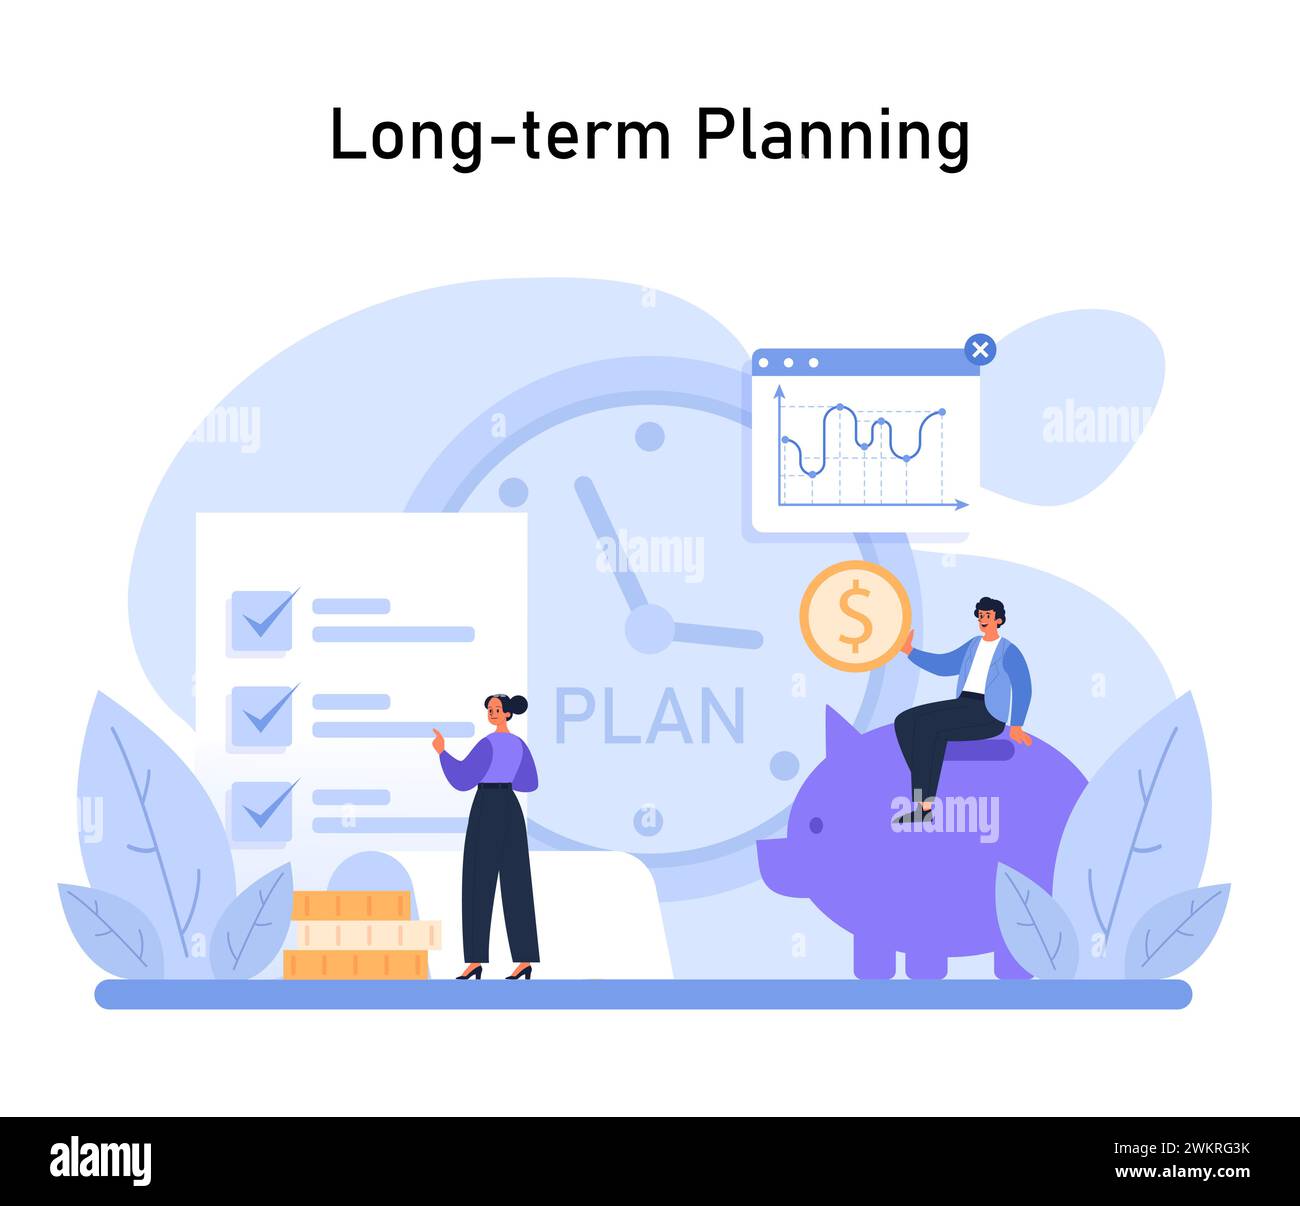 Long-term Planning concept. Highlights the importance of strategic foresight in financial investments for sustained growth. Flat vector illustration Stock Vector